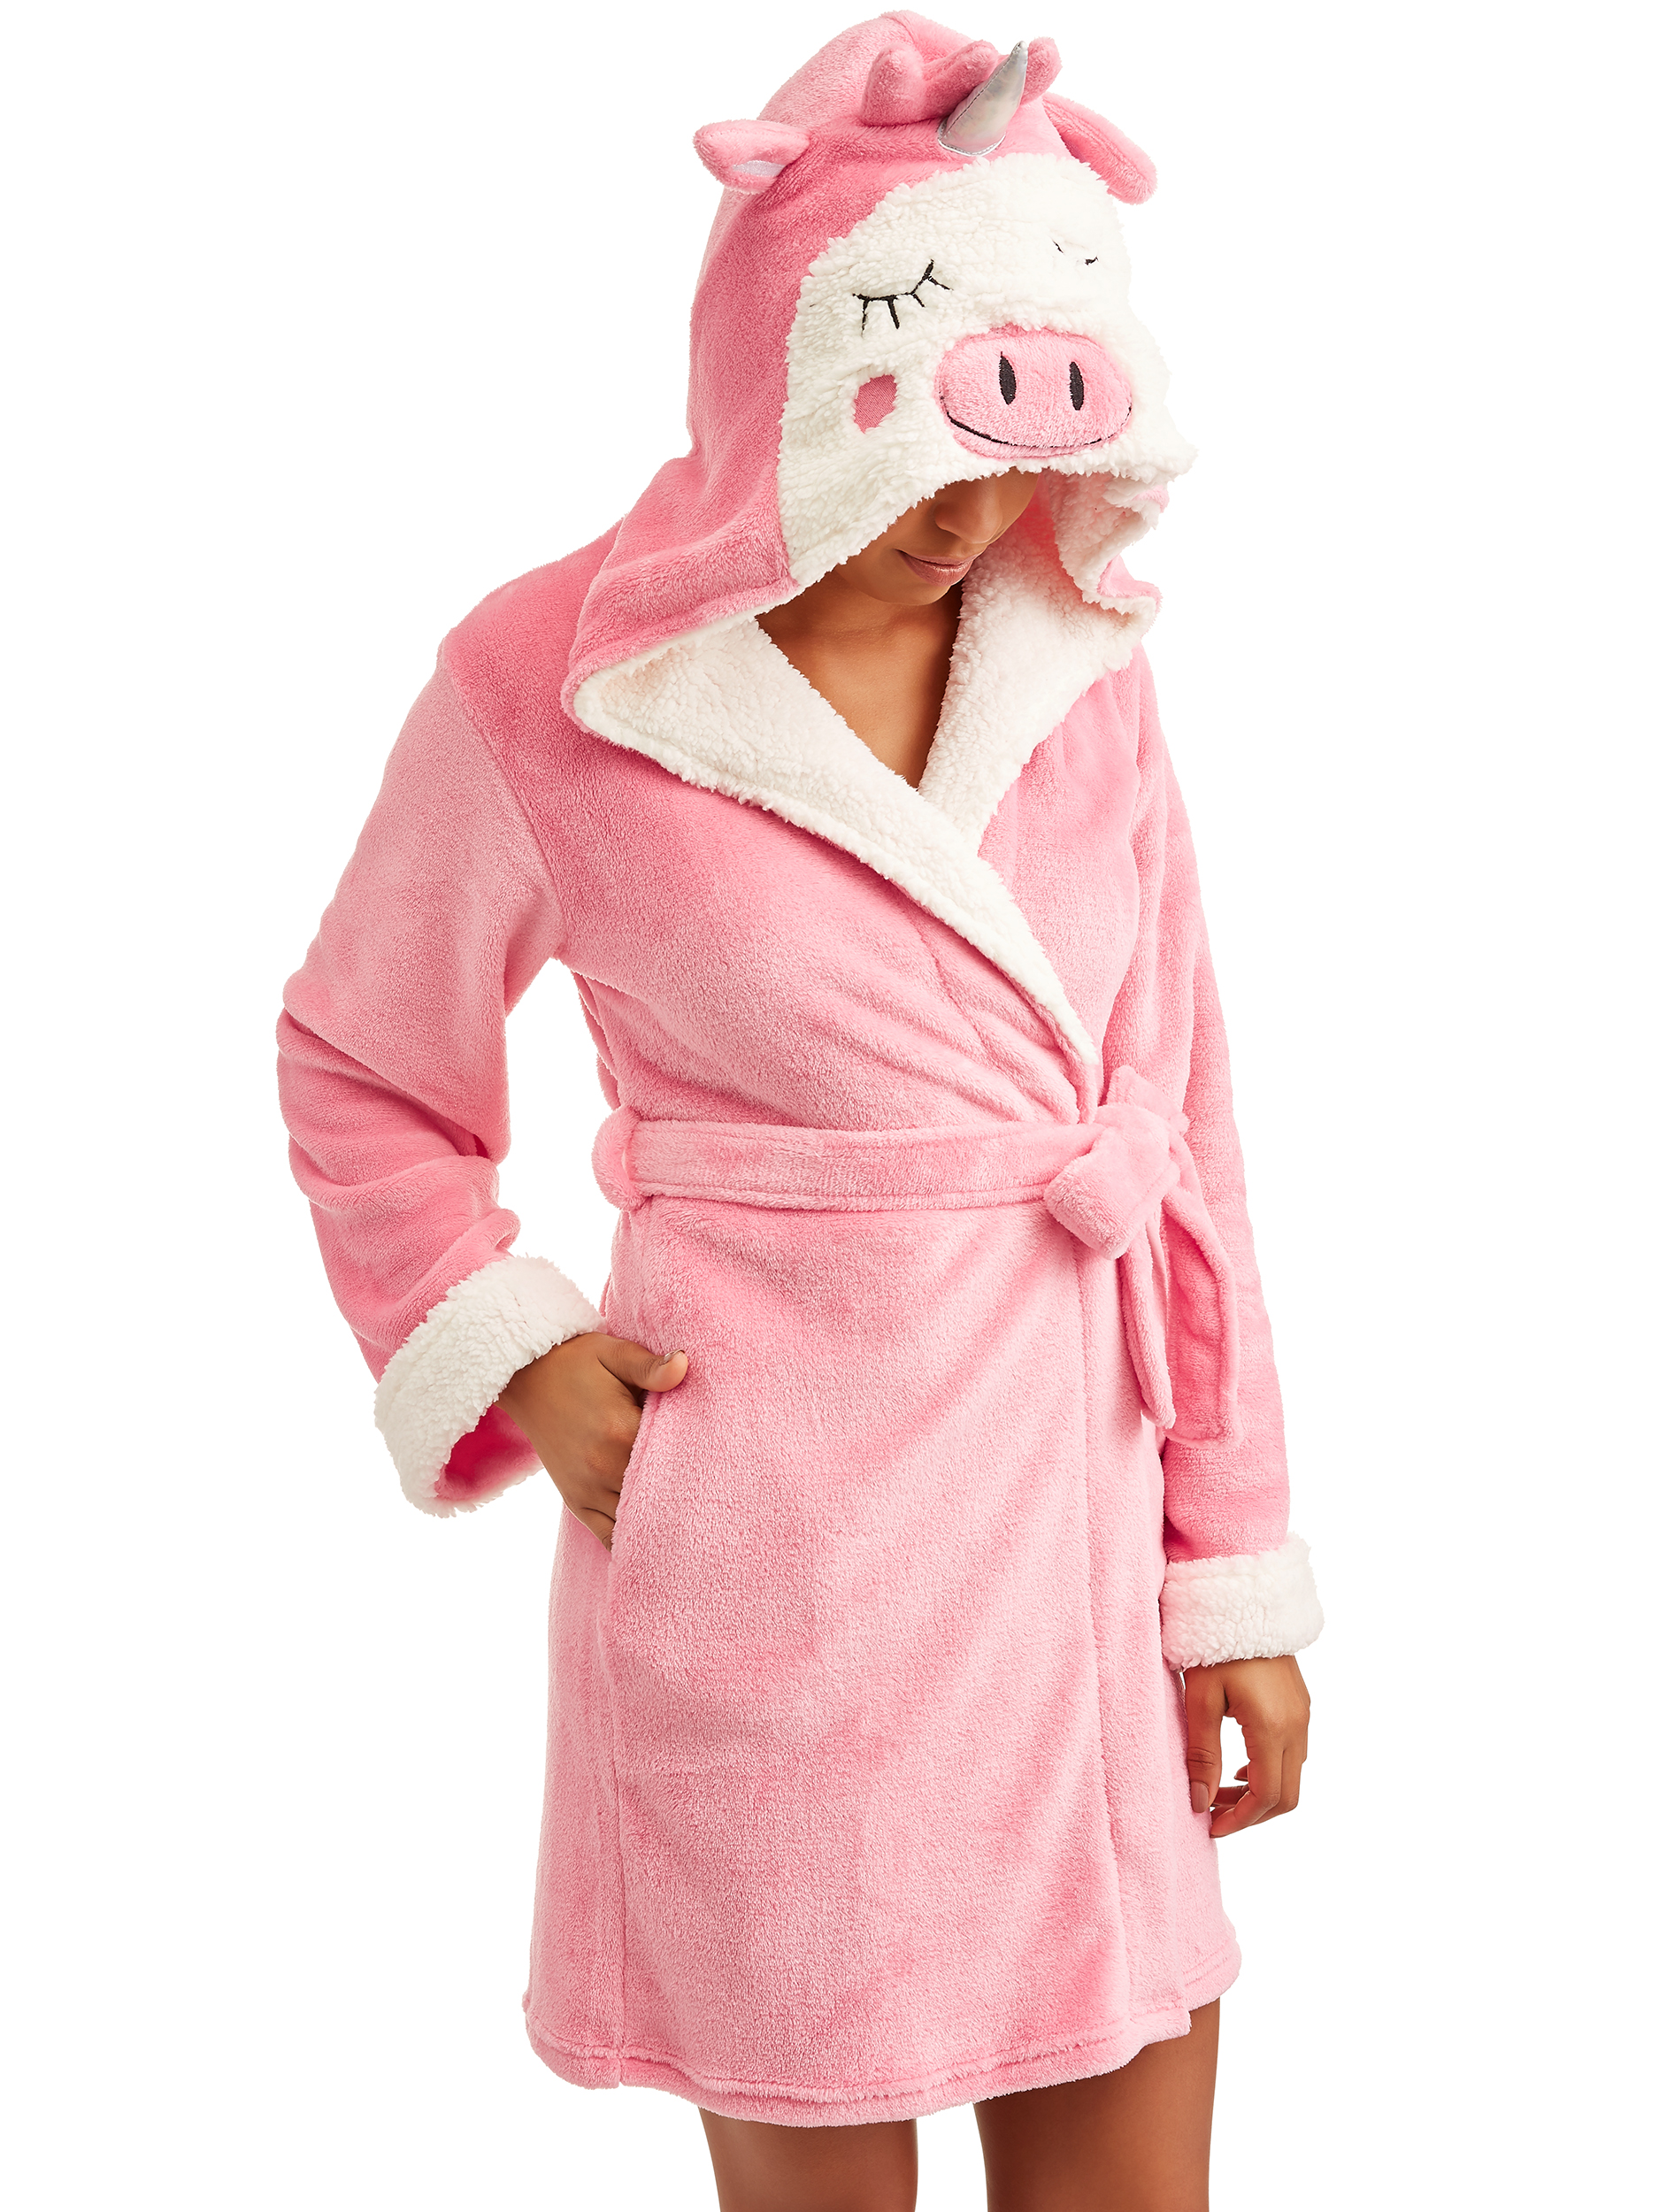 Body Candy Women's Luxe Critter Robe - image 3 of 4